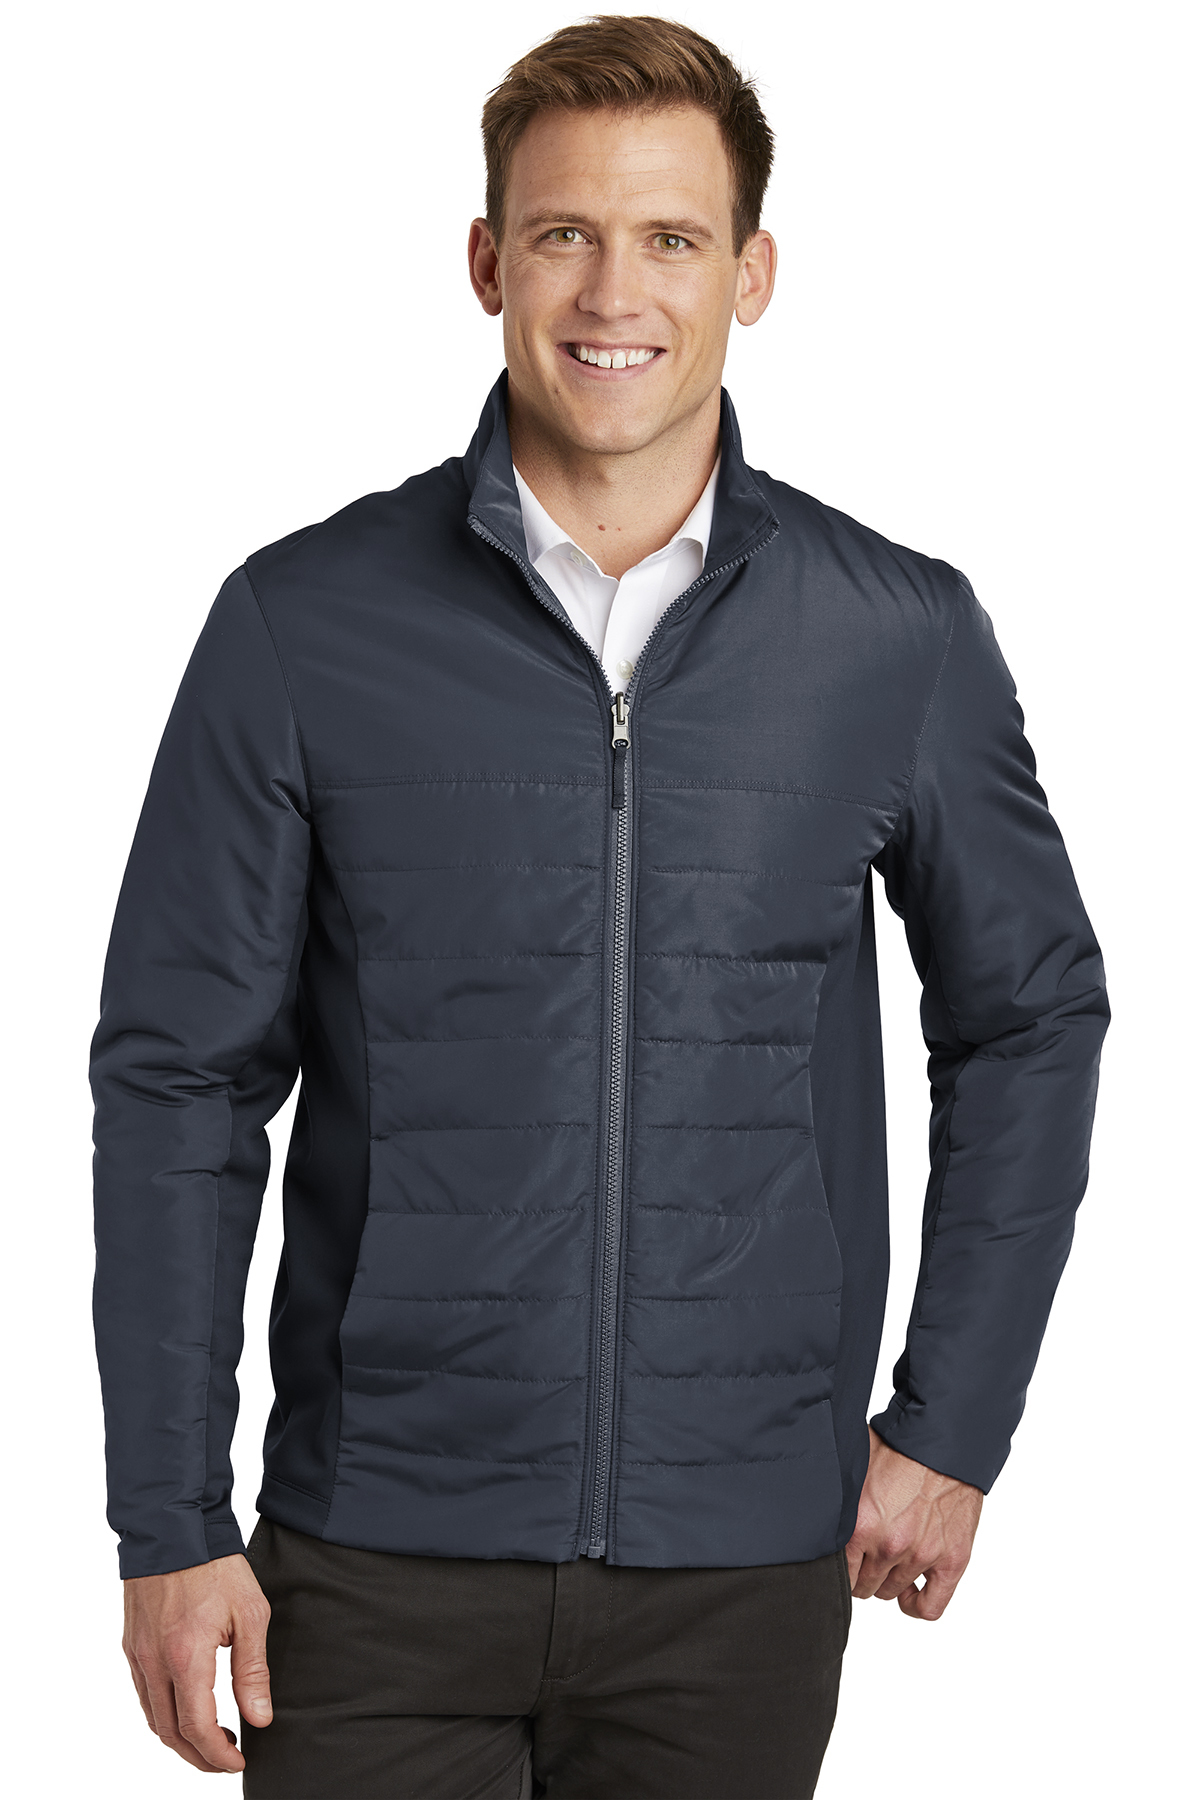 Port Authority J902 - Men's Collective Insulated Jacket